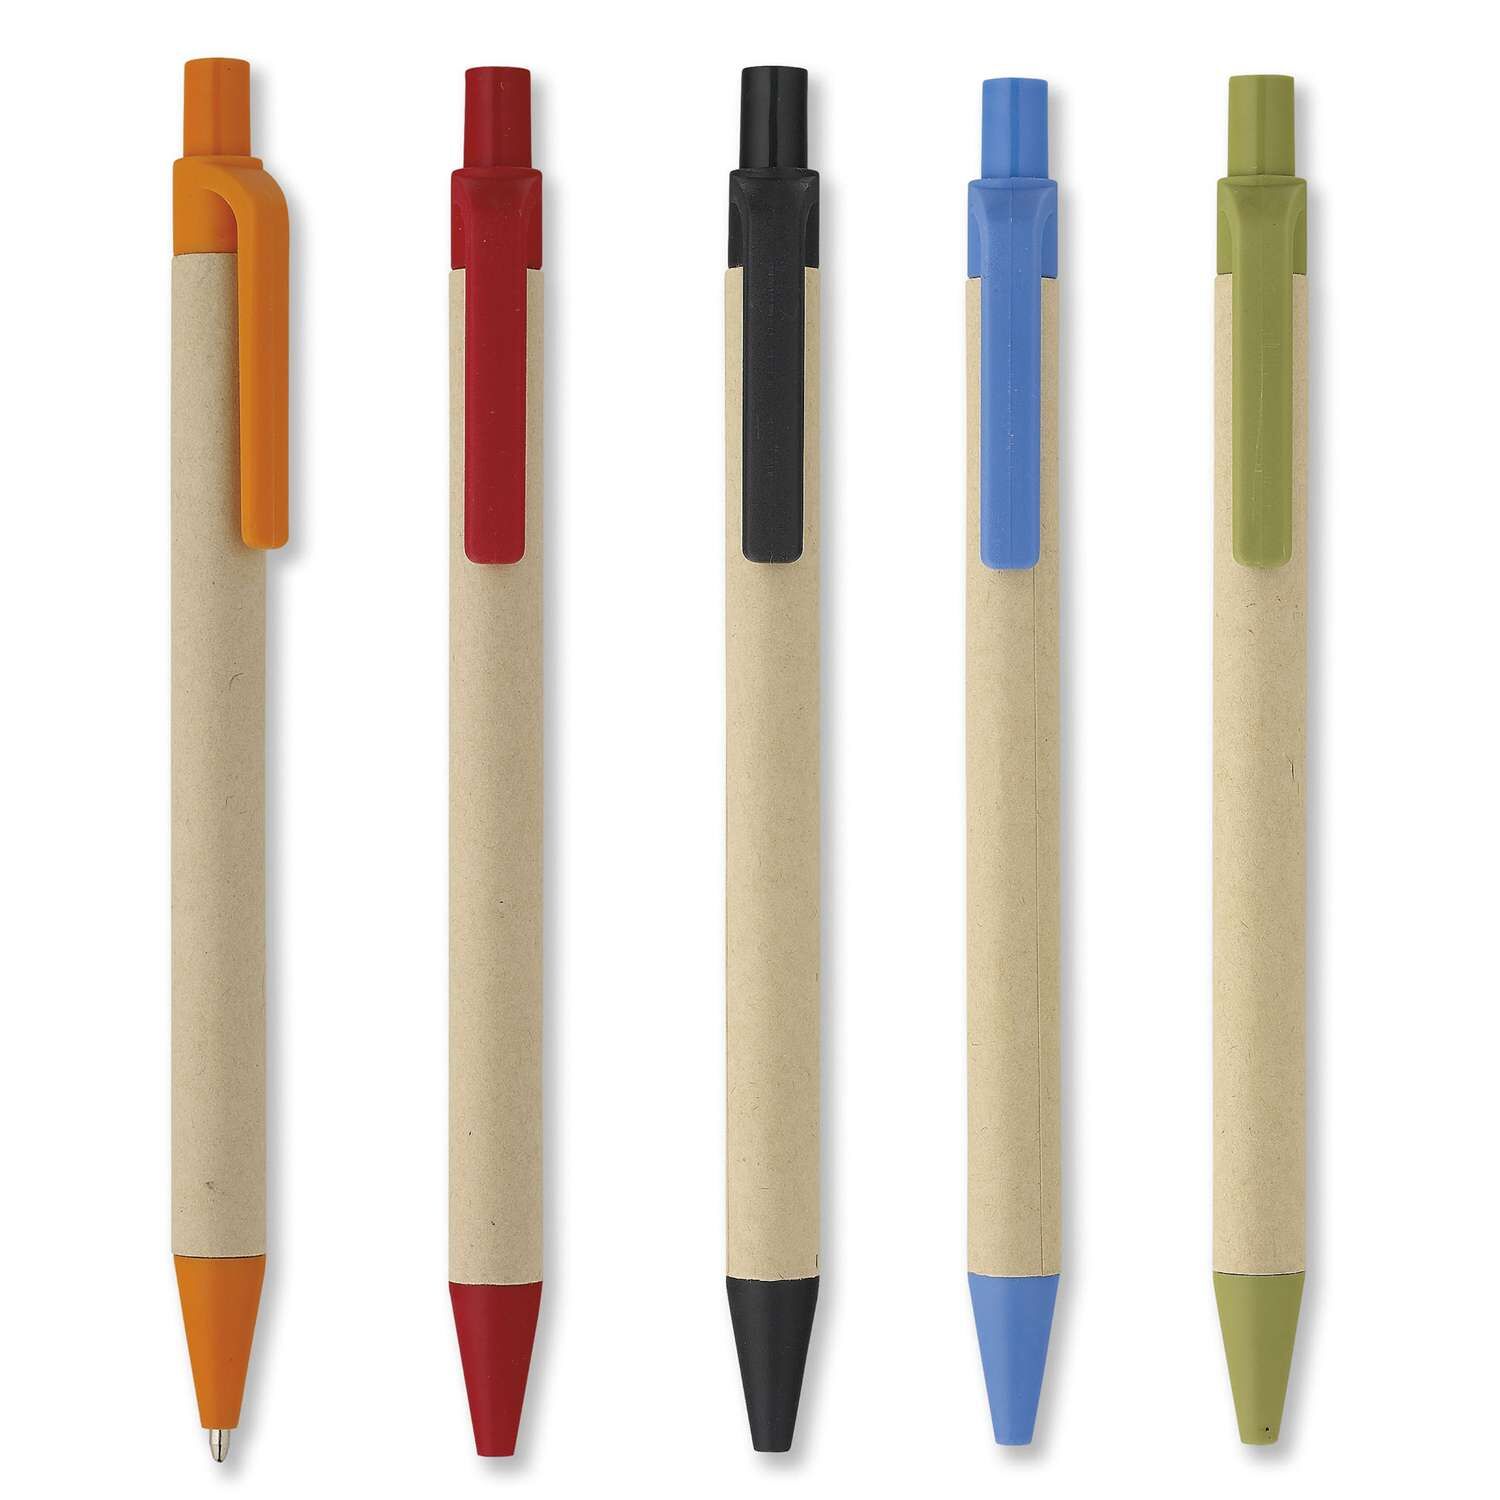 Promotional Printed Pens made from Recycled Paper